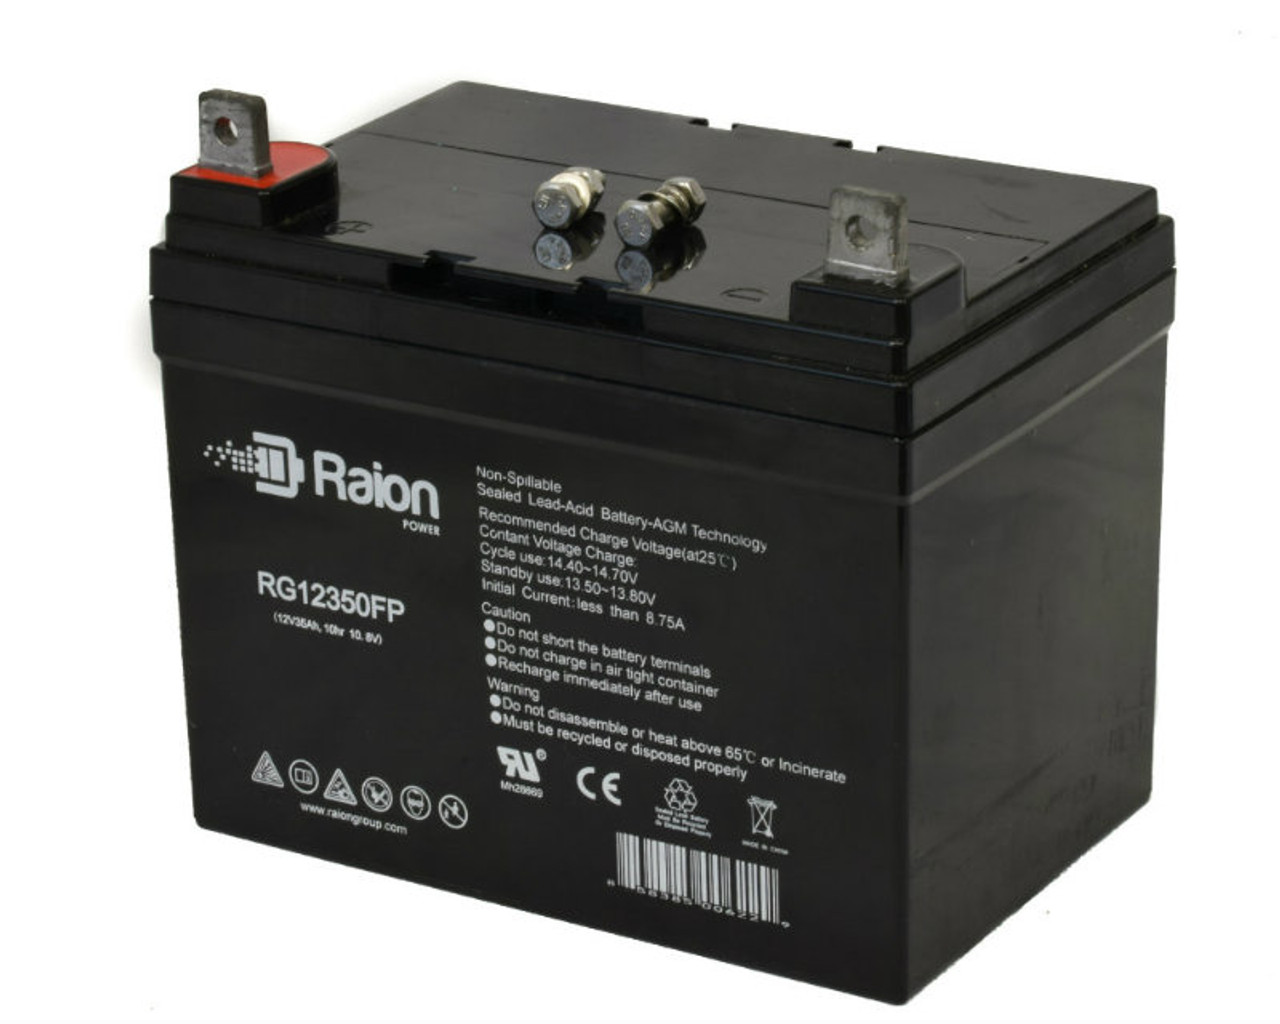 Raion Power Replacement 12V 35Ah Battery for J.I. Case & Case IH 108 - 1 Pack